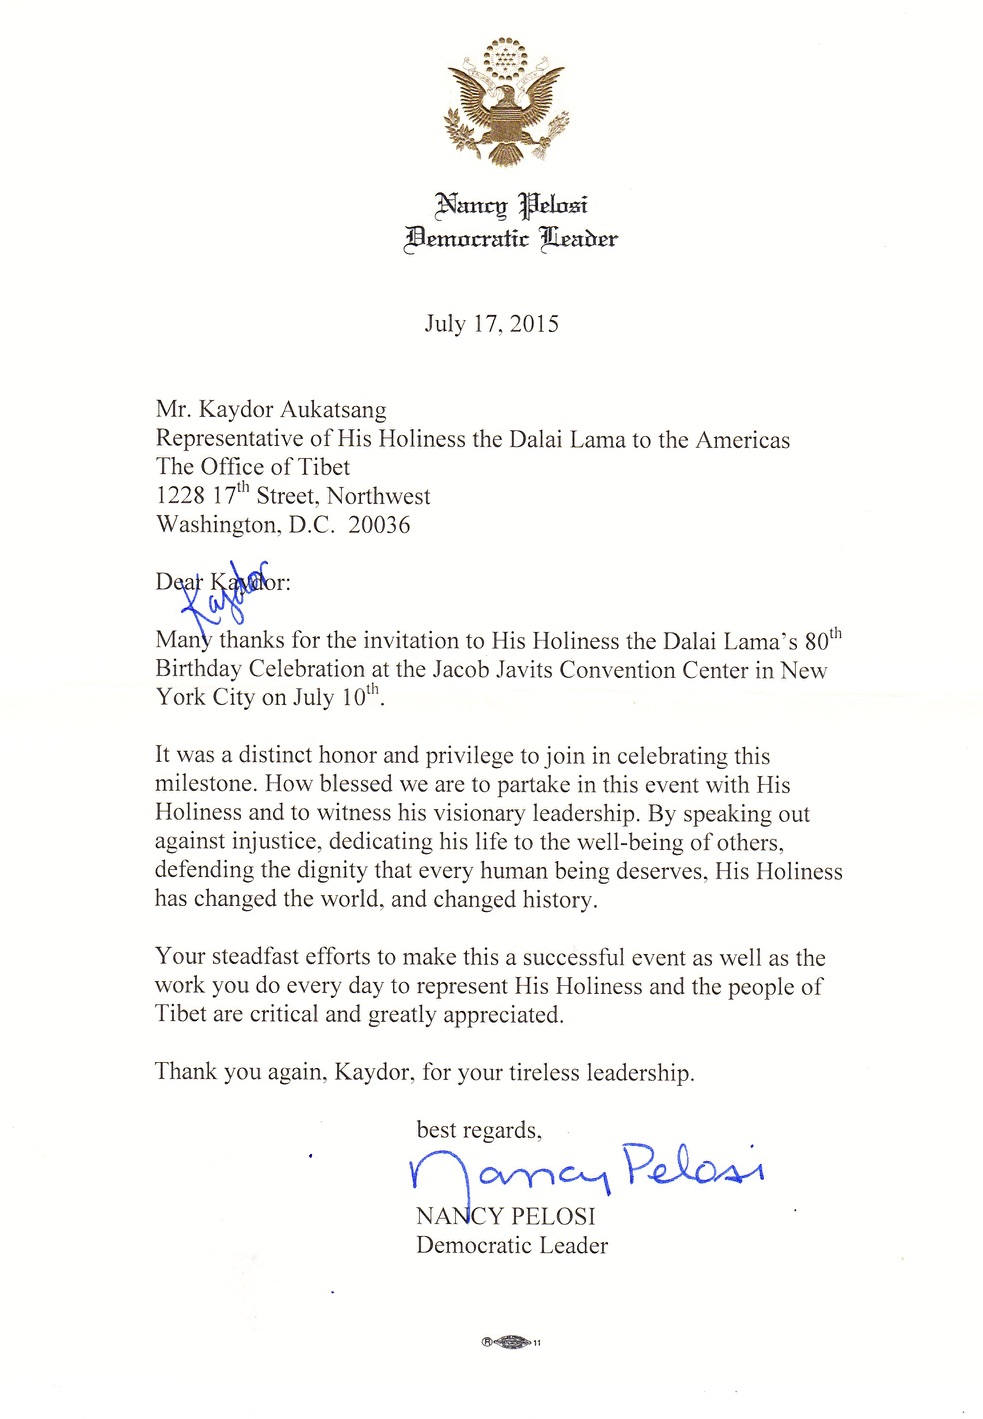 Thank you letter from Leader Nancy Pelosi